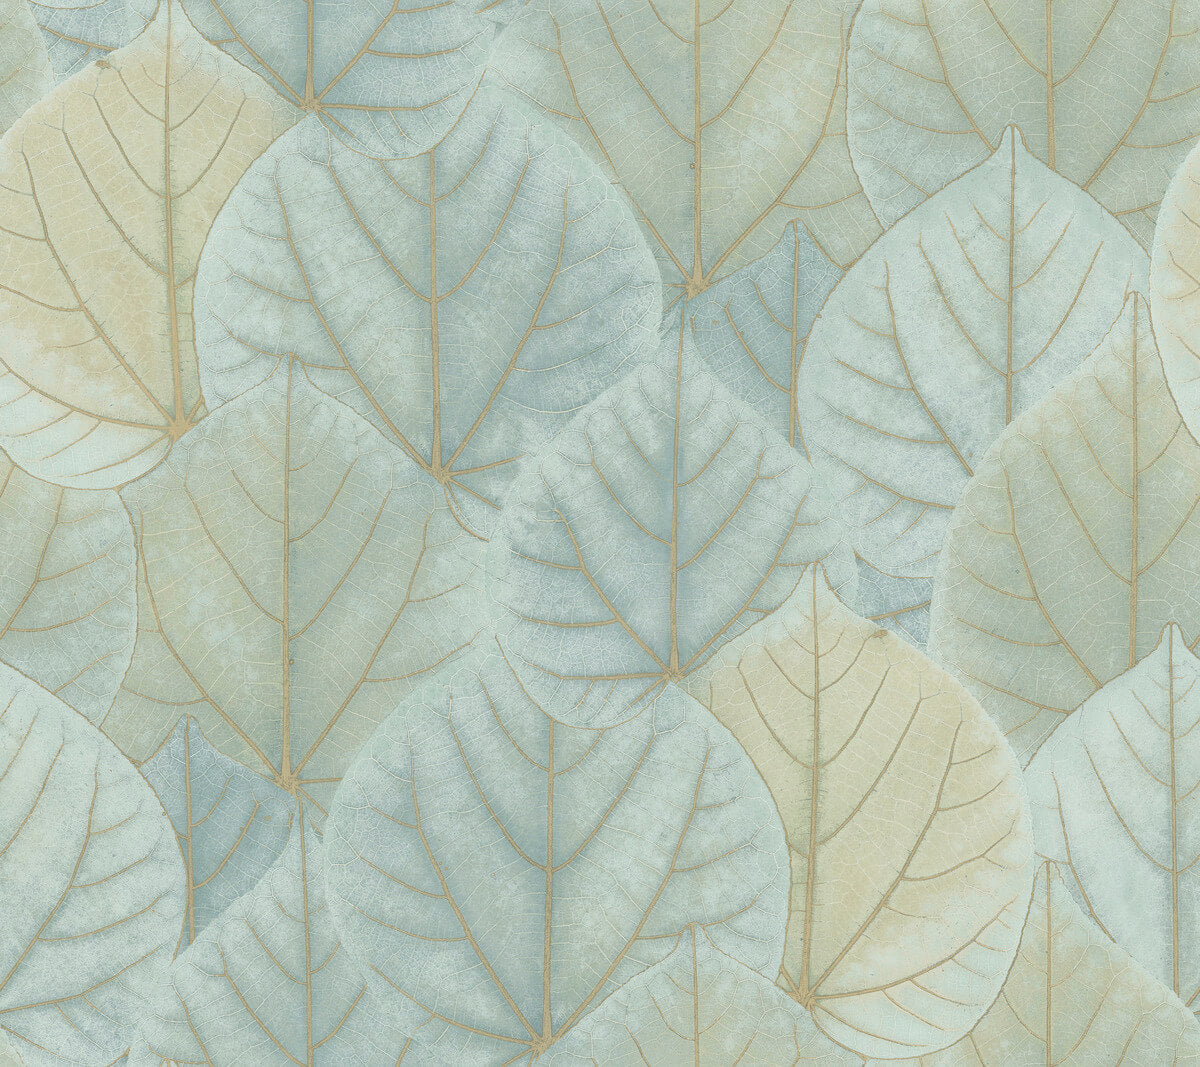 Simply Candice Leaf Concerto Peel & Stick Wallpaper - Turquoise